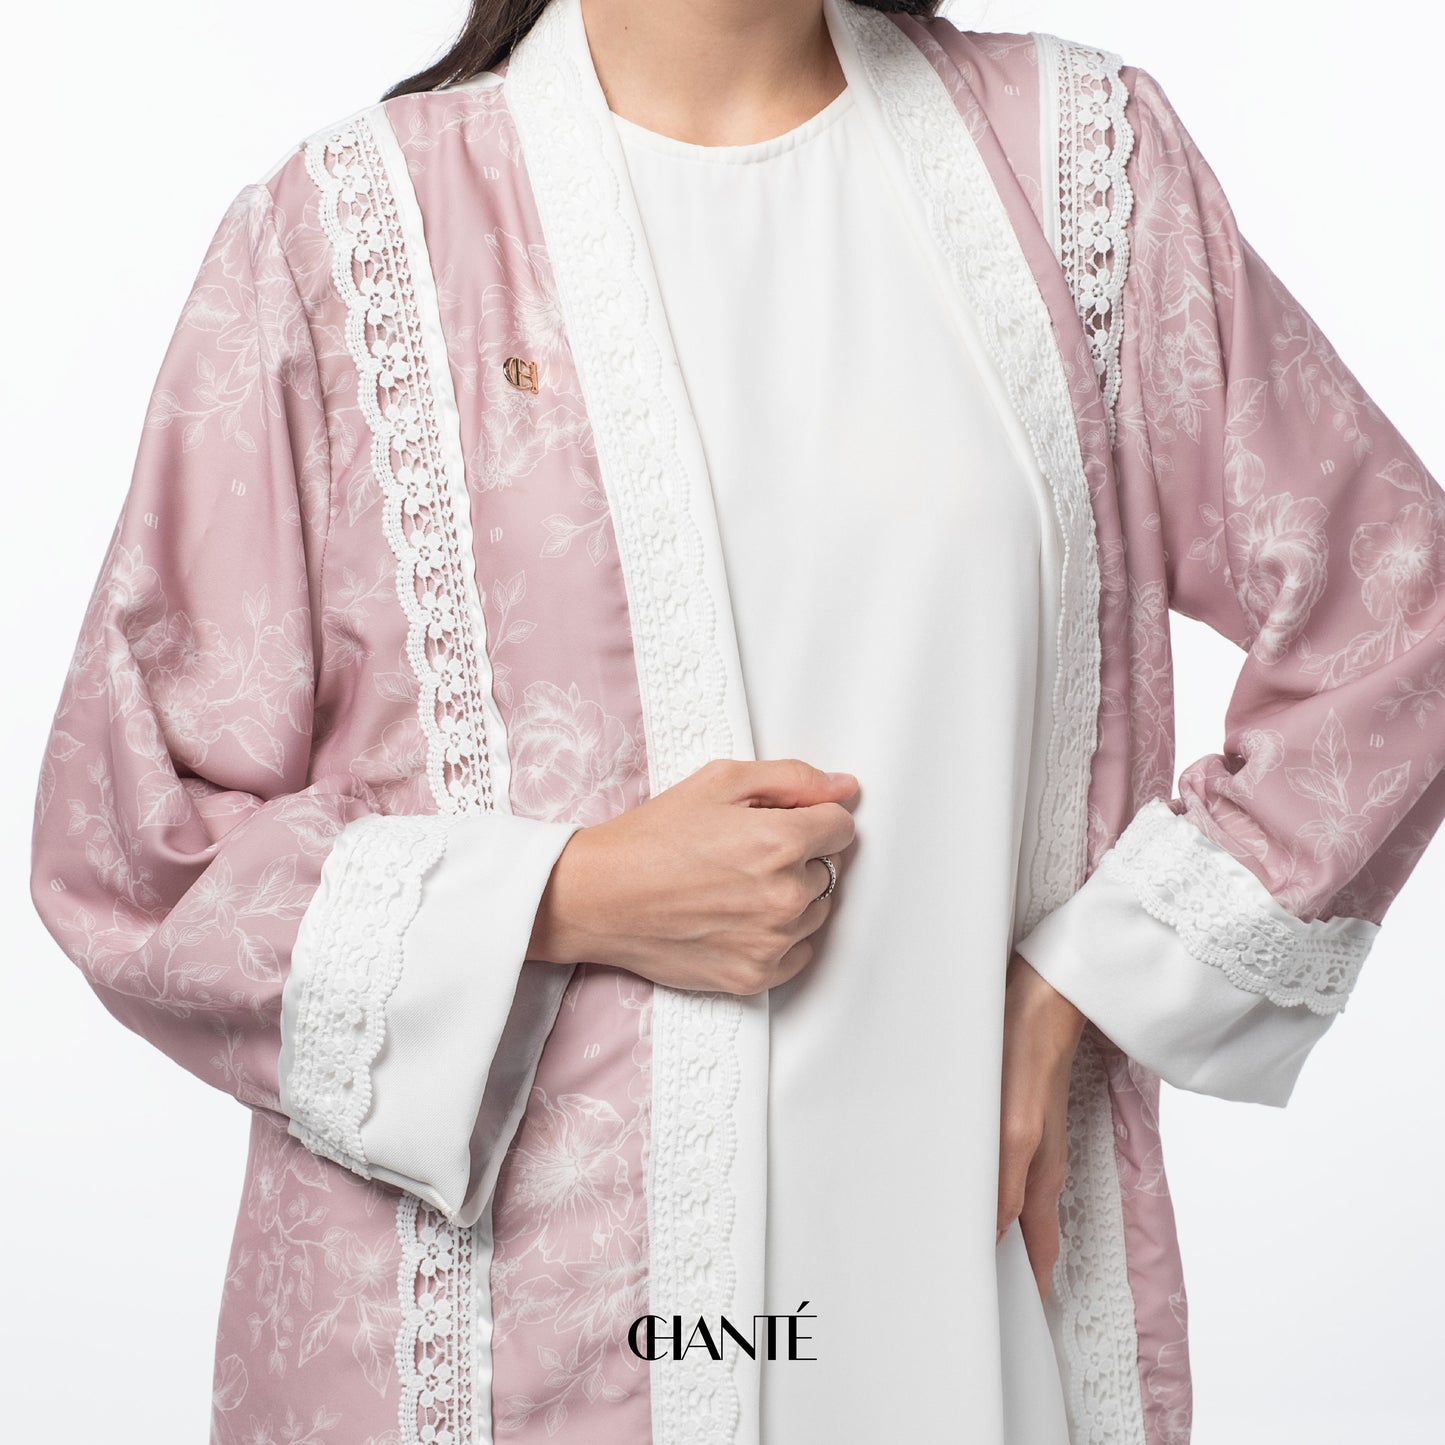 Chanté - Aaminah Outer in Pink